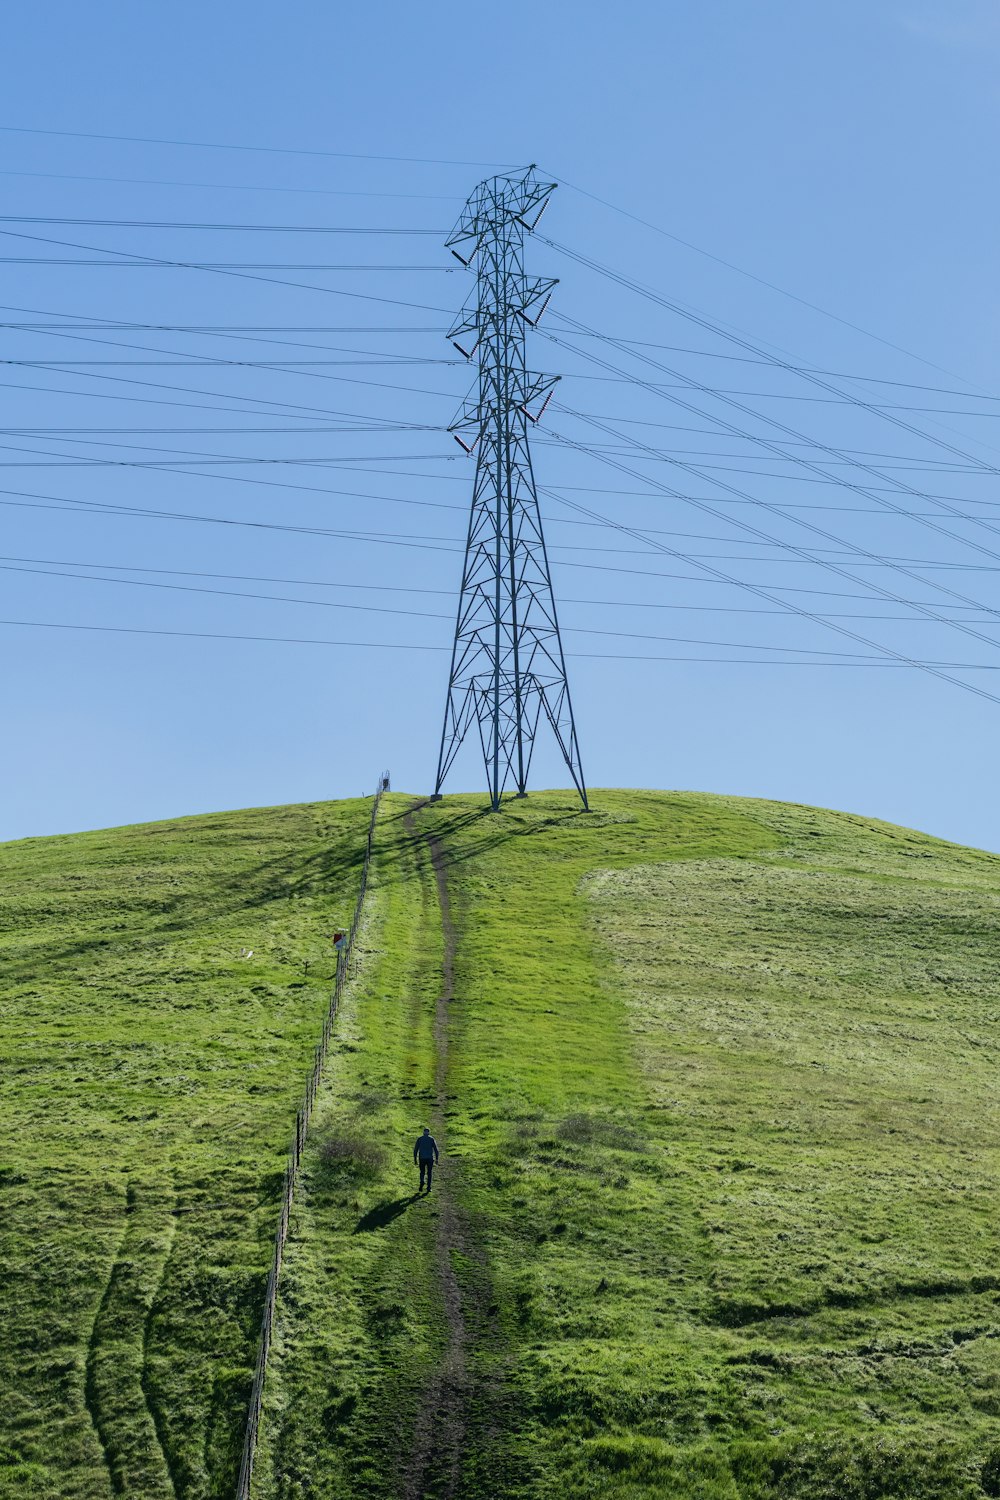 a person walking up a hill with power lines in the background